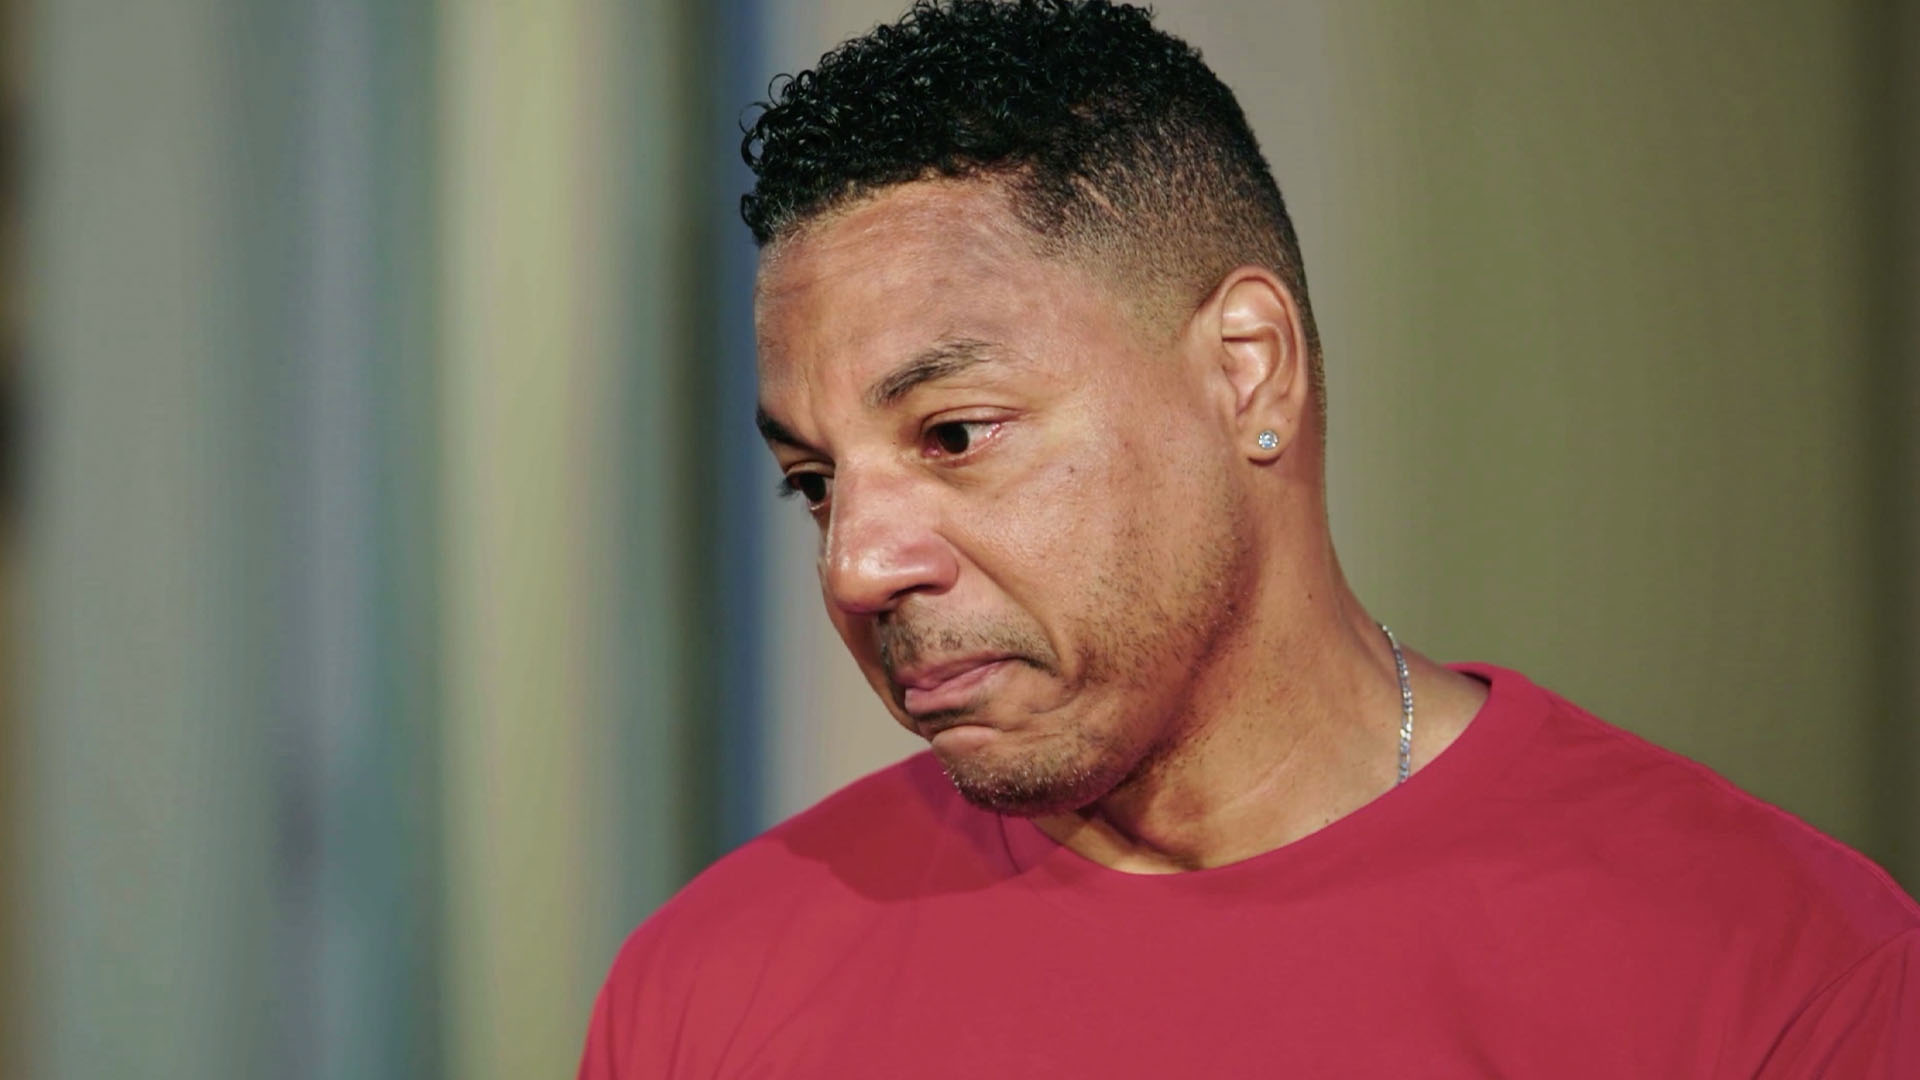 Watch Rich Opens Up About His Father | Marriage Boot Camp: Hip Hop Edition Video Extras